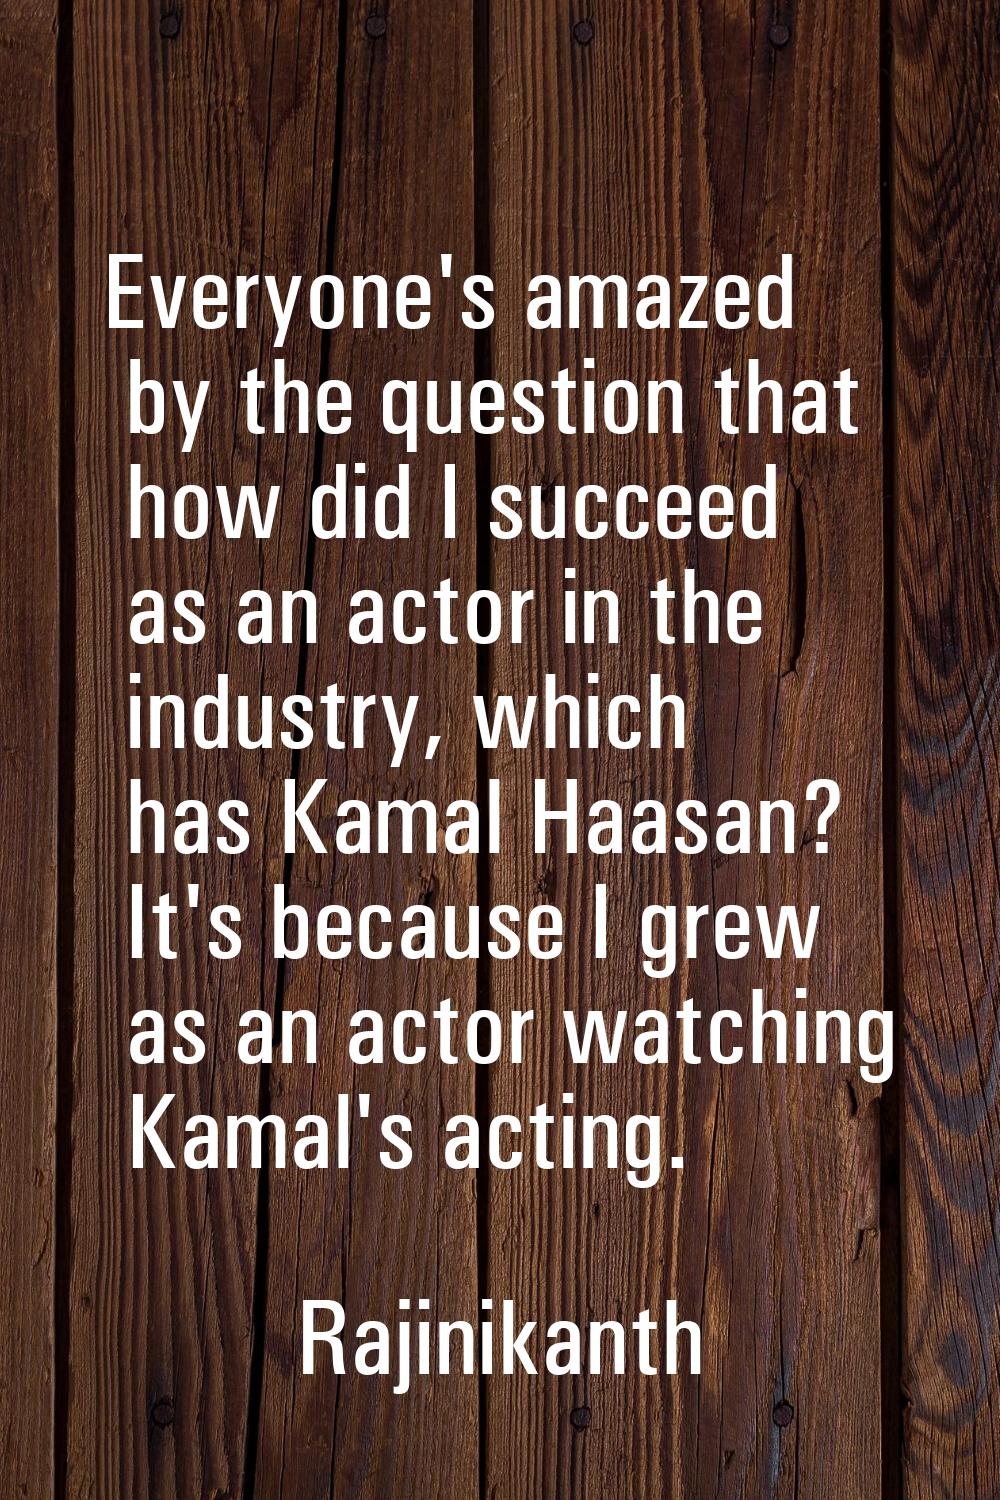 Everyone's amazed by the question that how did I succeed as an actor in the industry, which has Kam